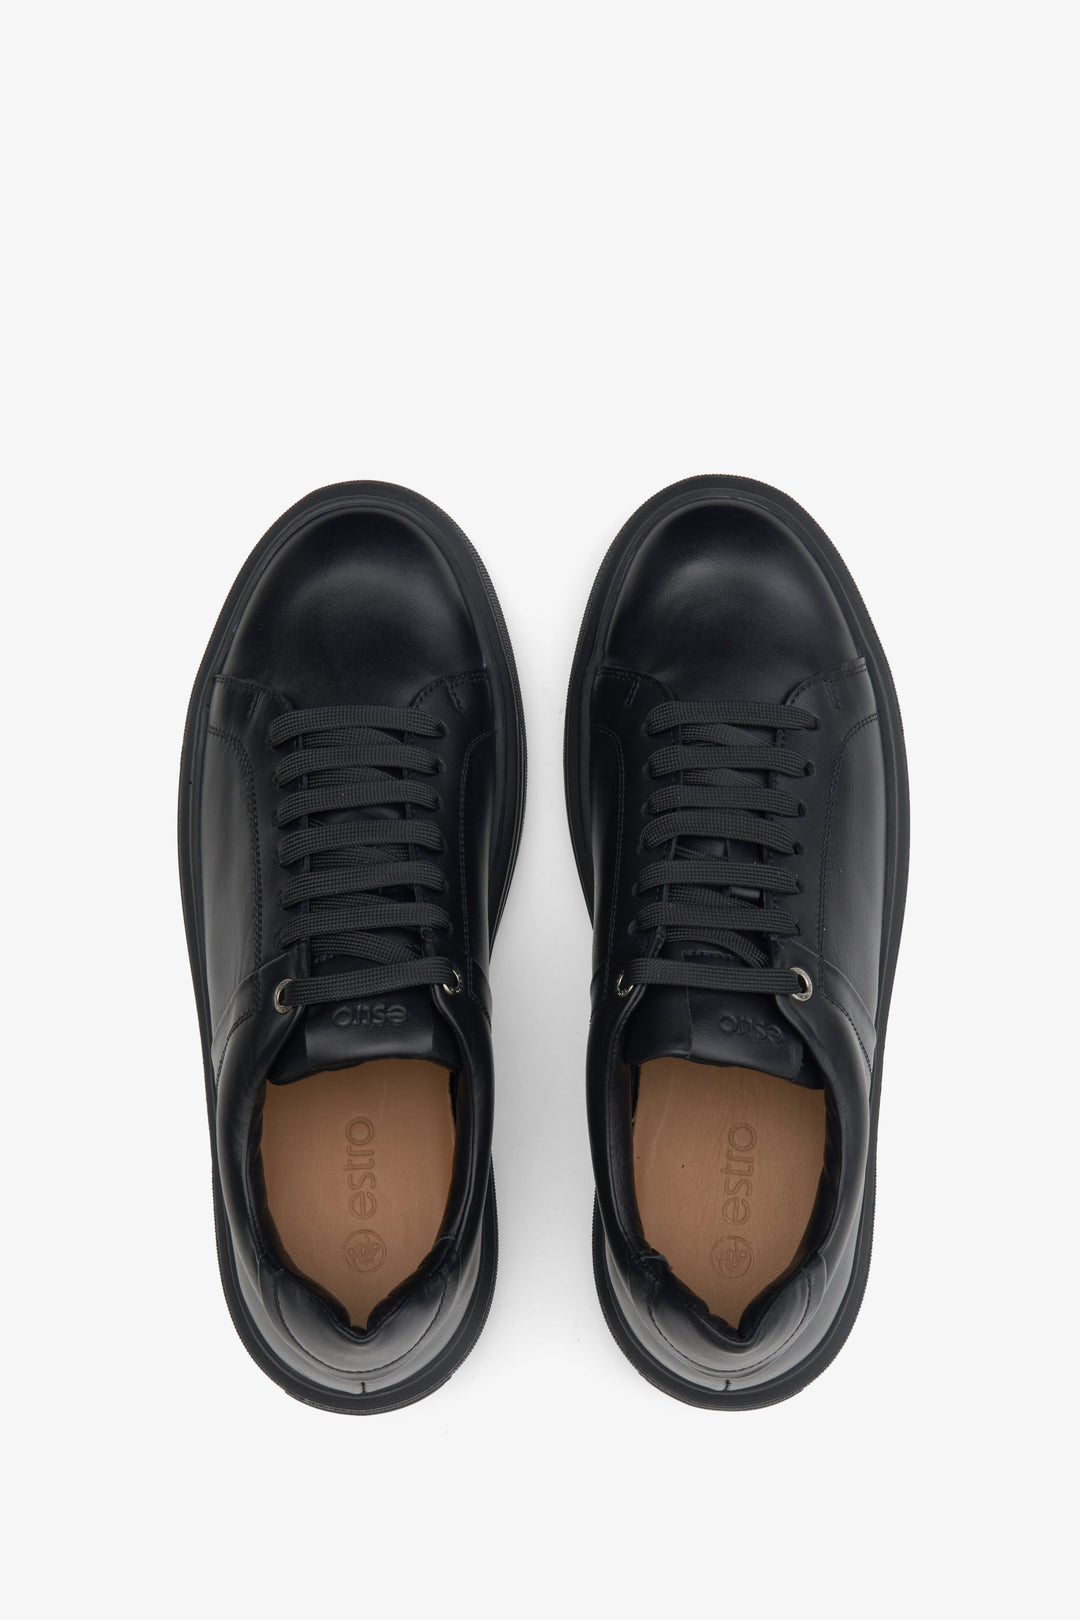 Leather, lace-up Estro men's sneakers in black - presentation of the footwear from above.